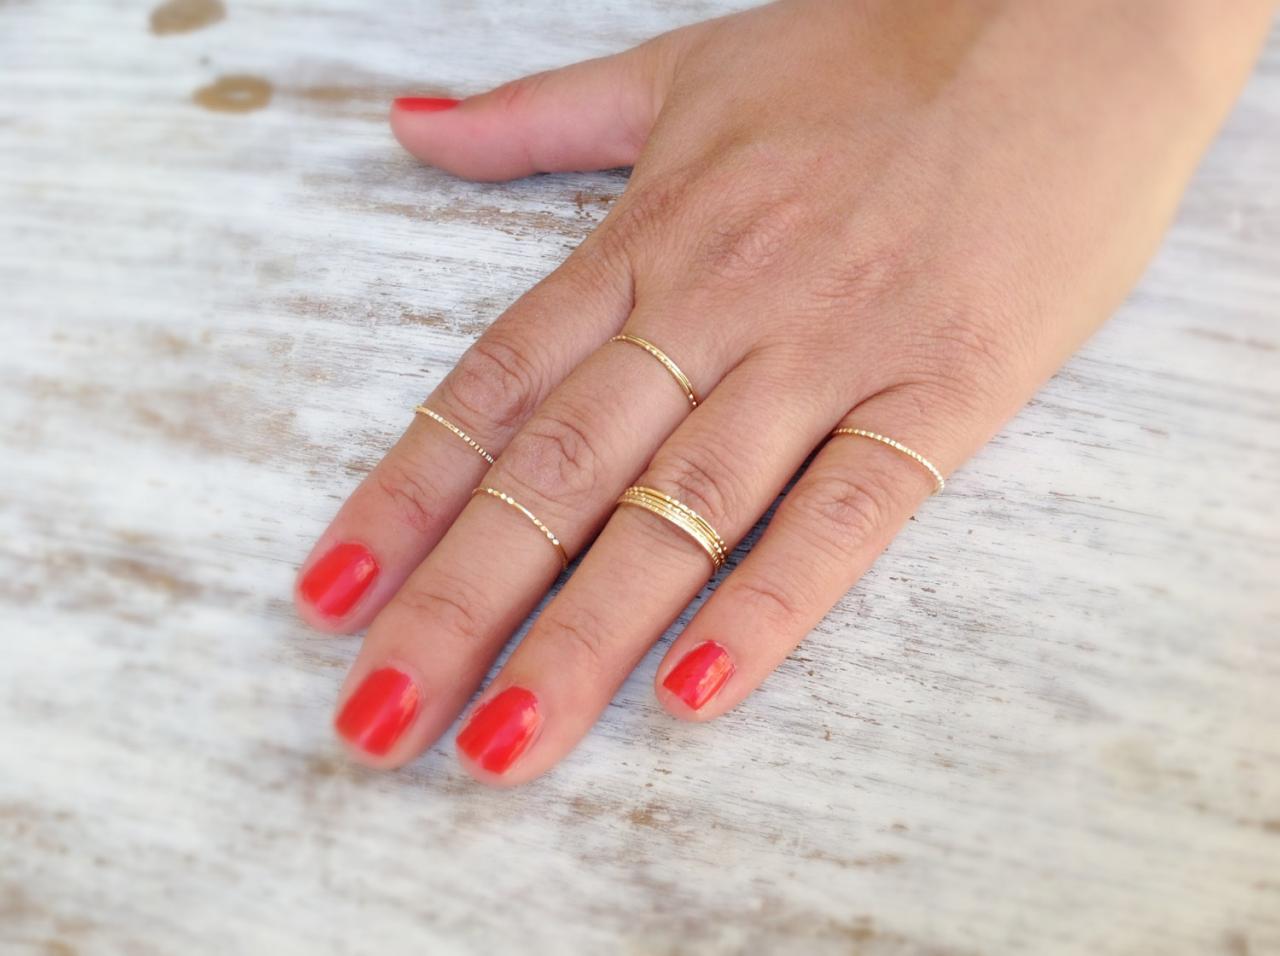 Special offer- 10 Gold rings, Stacking ring, stacking gold rings, knuckle rings, thin ring, hammered ring, tiny ring, gold knuckle rings2121